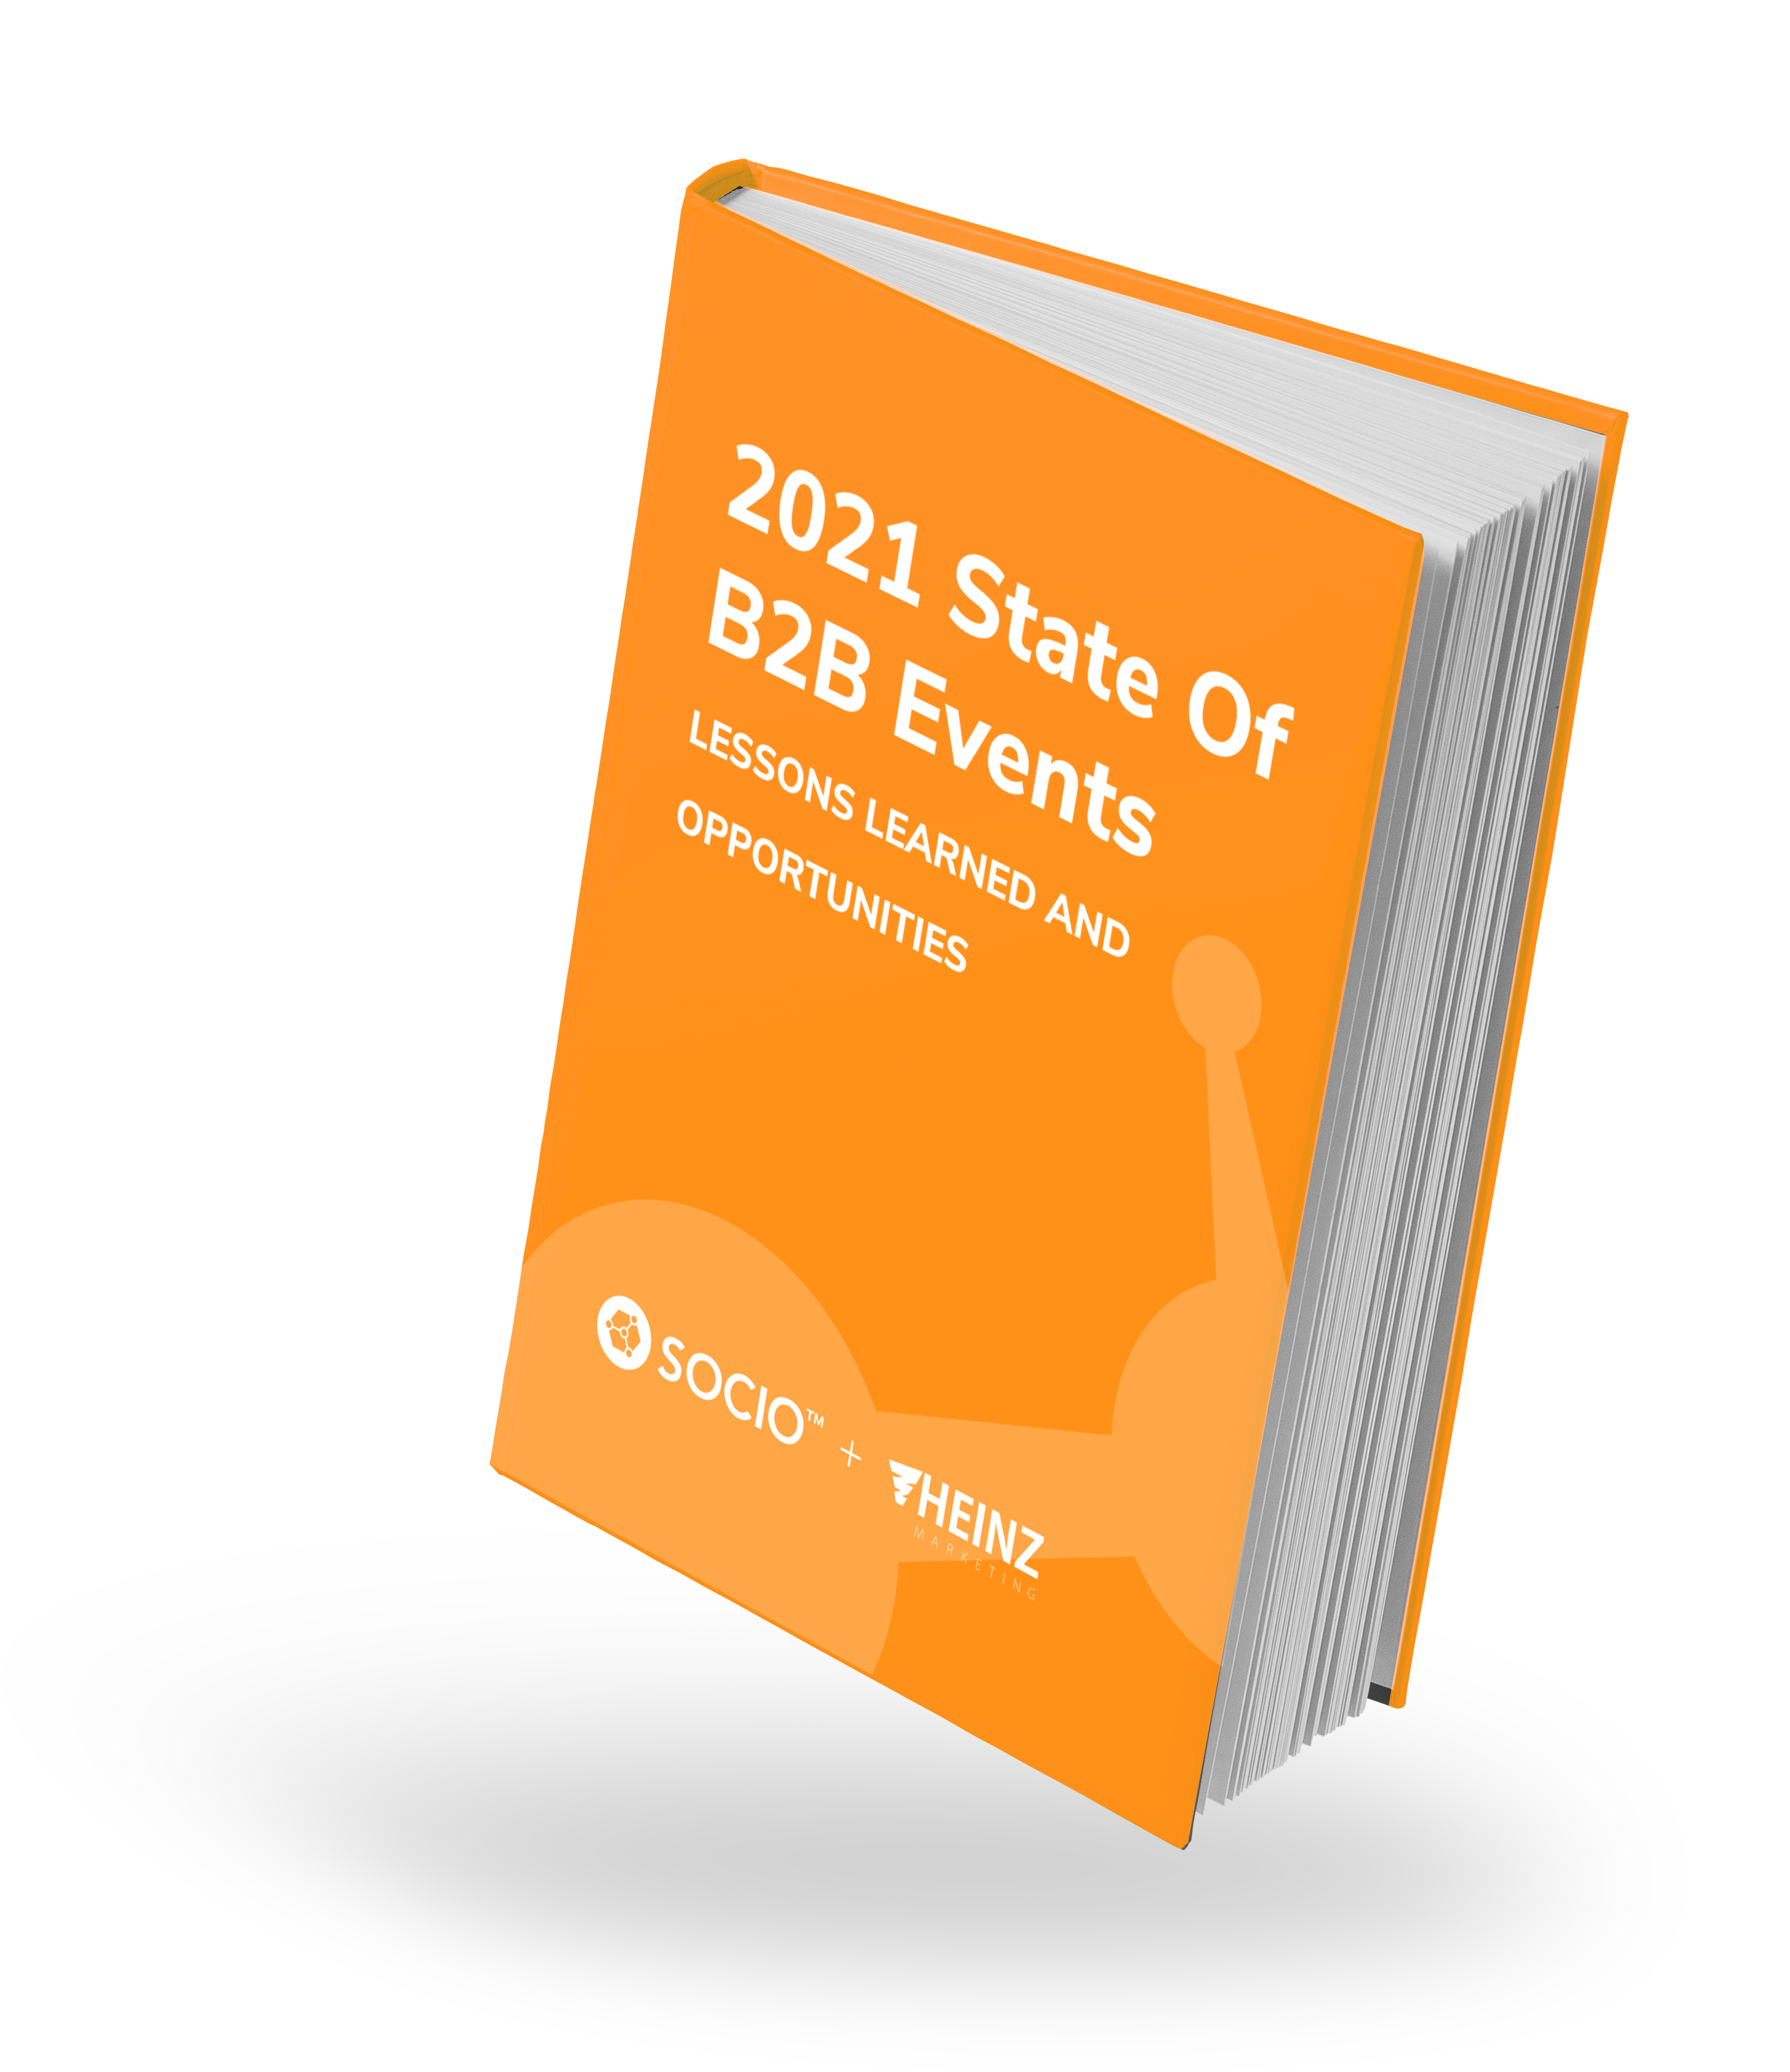 2021-State-of-B2B-Events-ebook